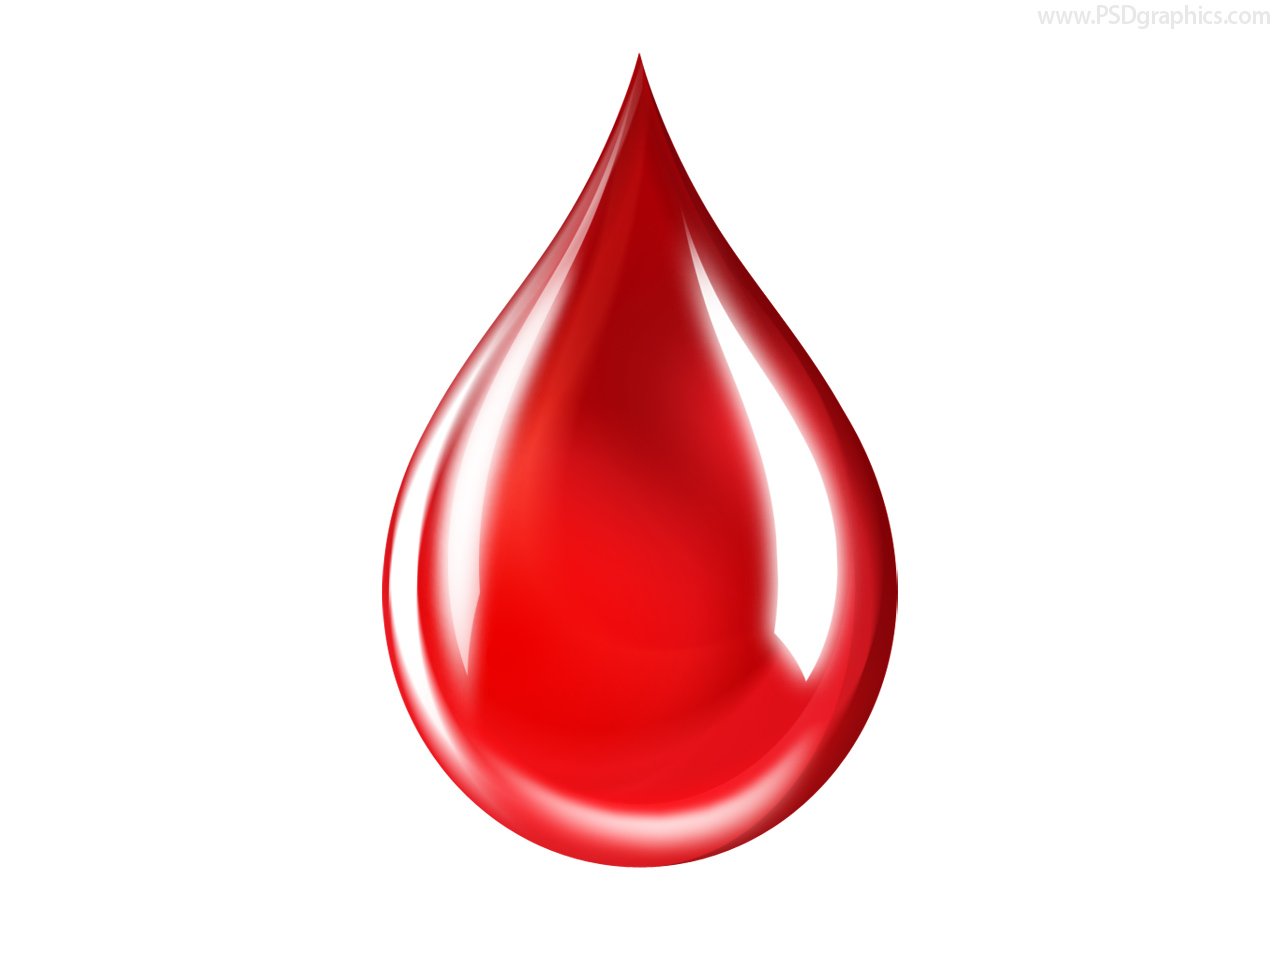 Blood drop with red cross PSD icon | PSDGraphics